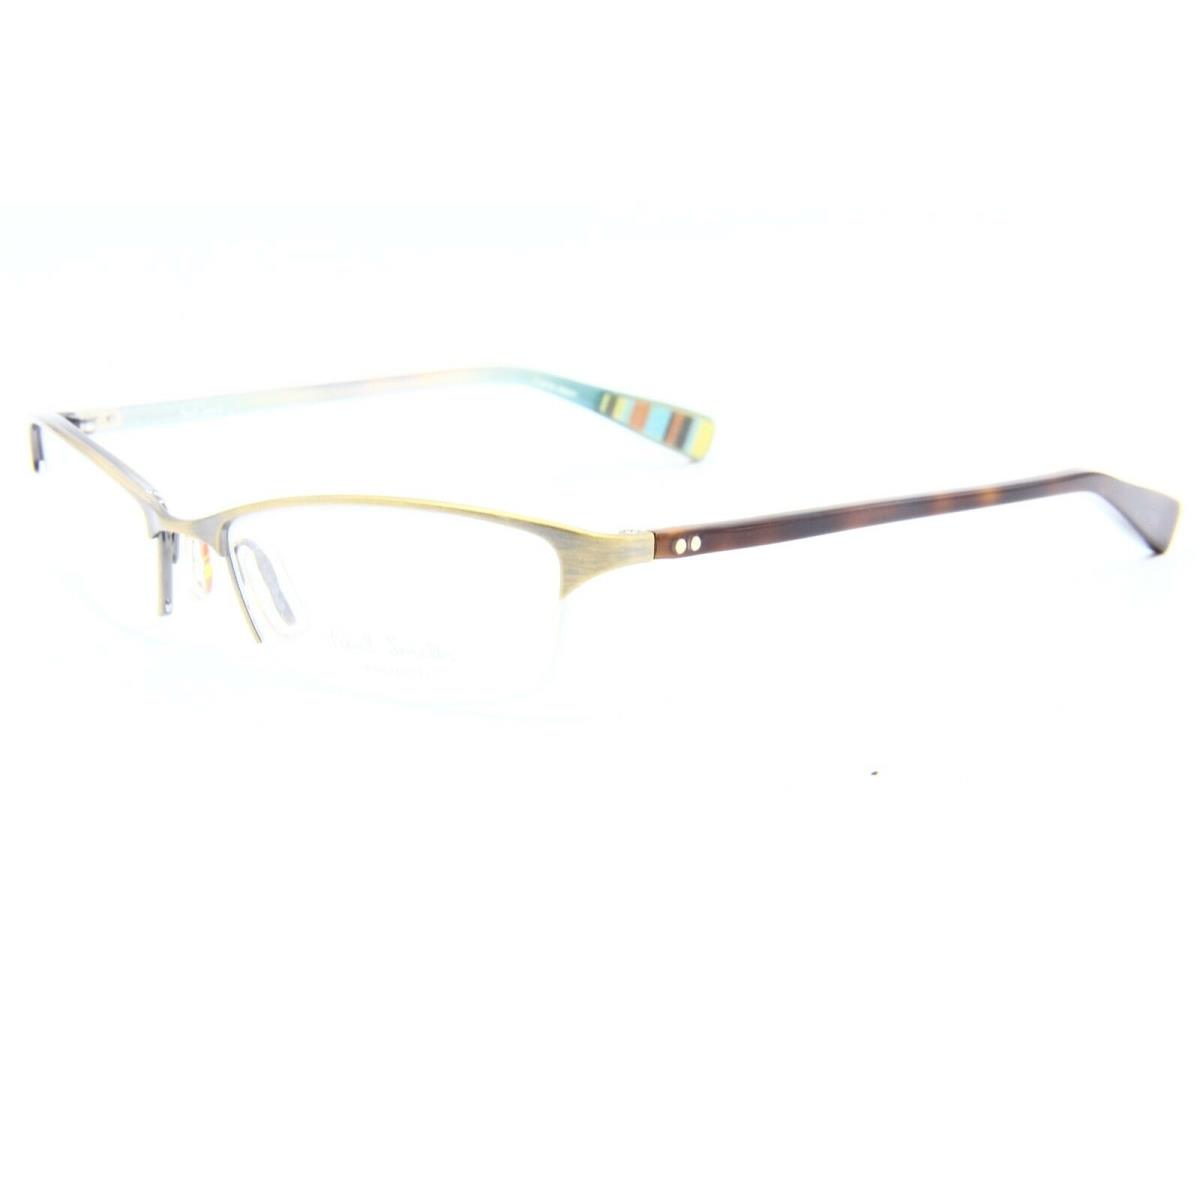 Paul Smith PS-186 TW Gold Eyeglasses Frame RX 53-17